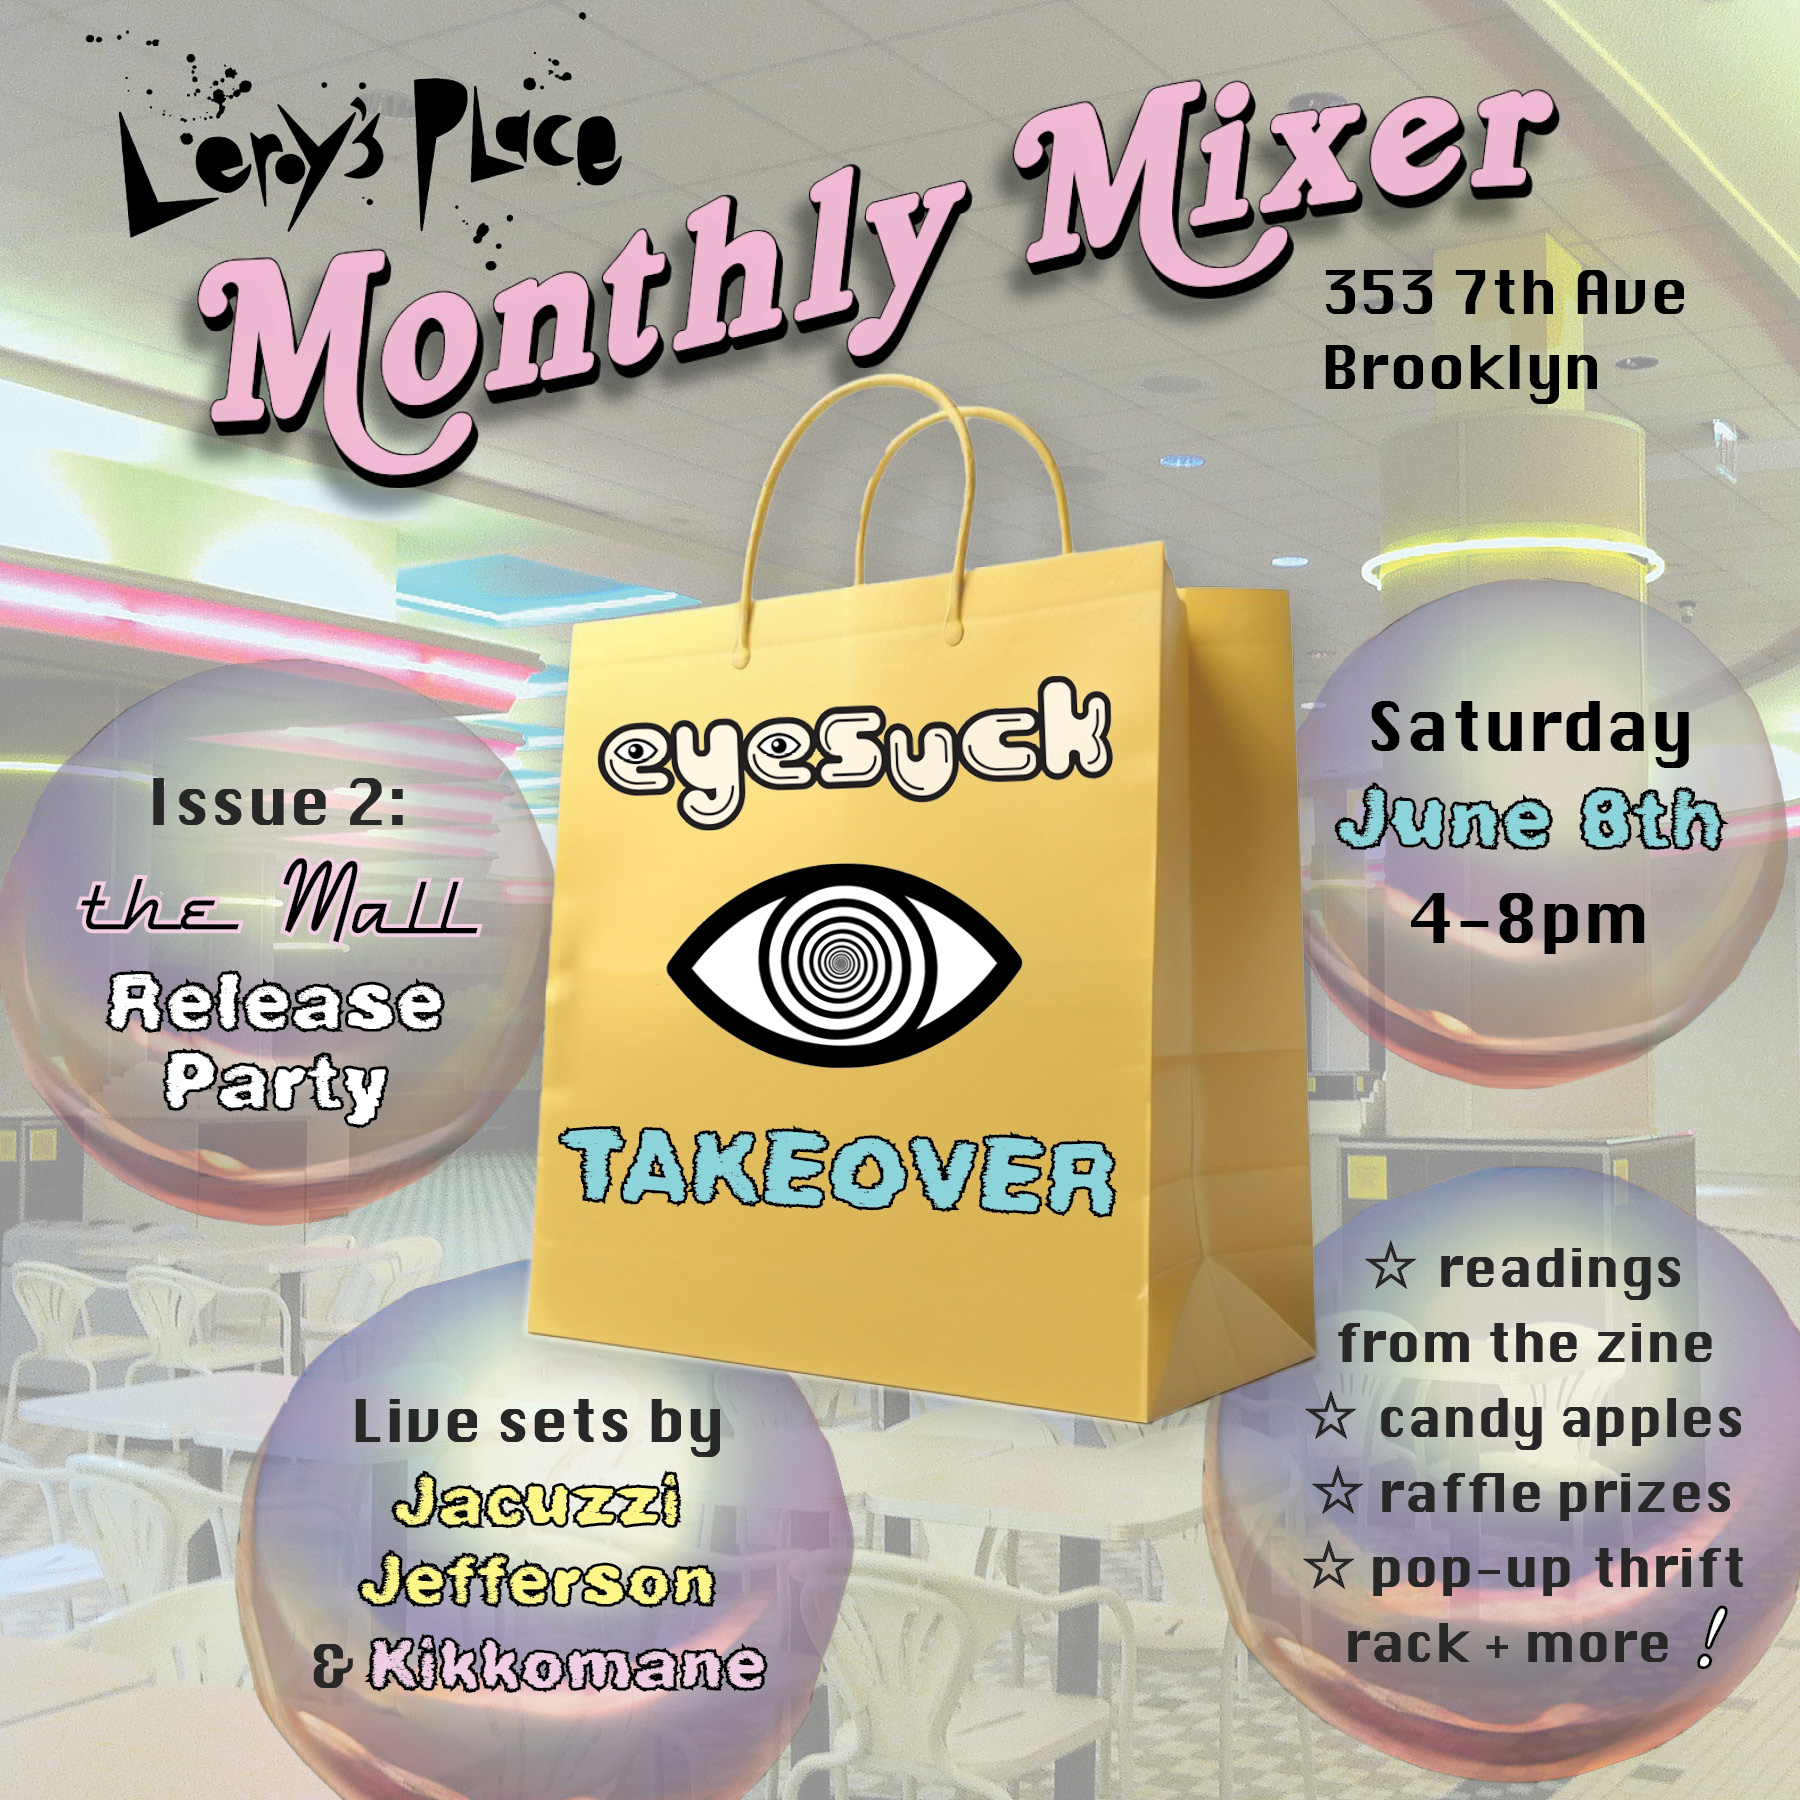 Flyer advertising a free courtyard party for the release of issue 2 of eyesuck zine at Leroy's Place